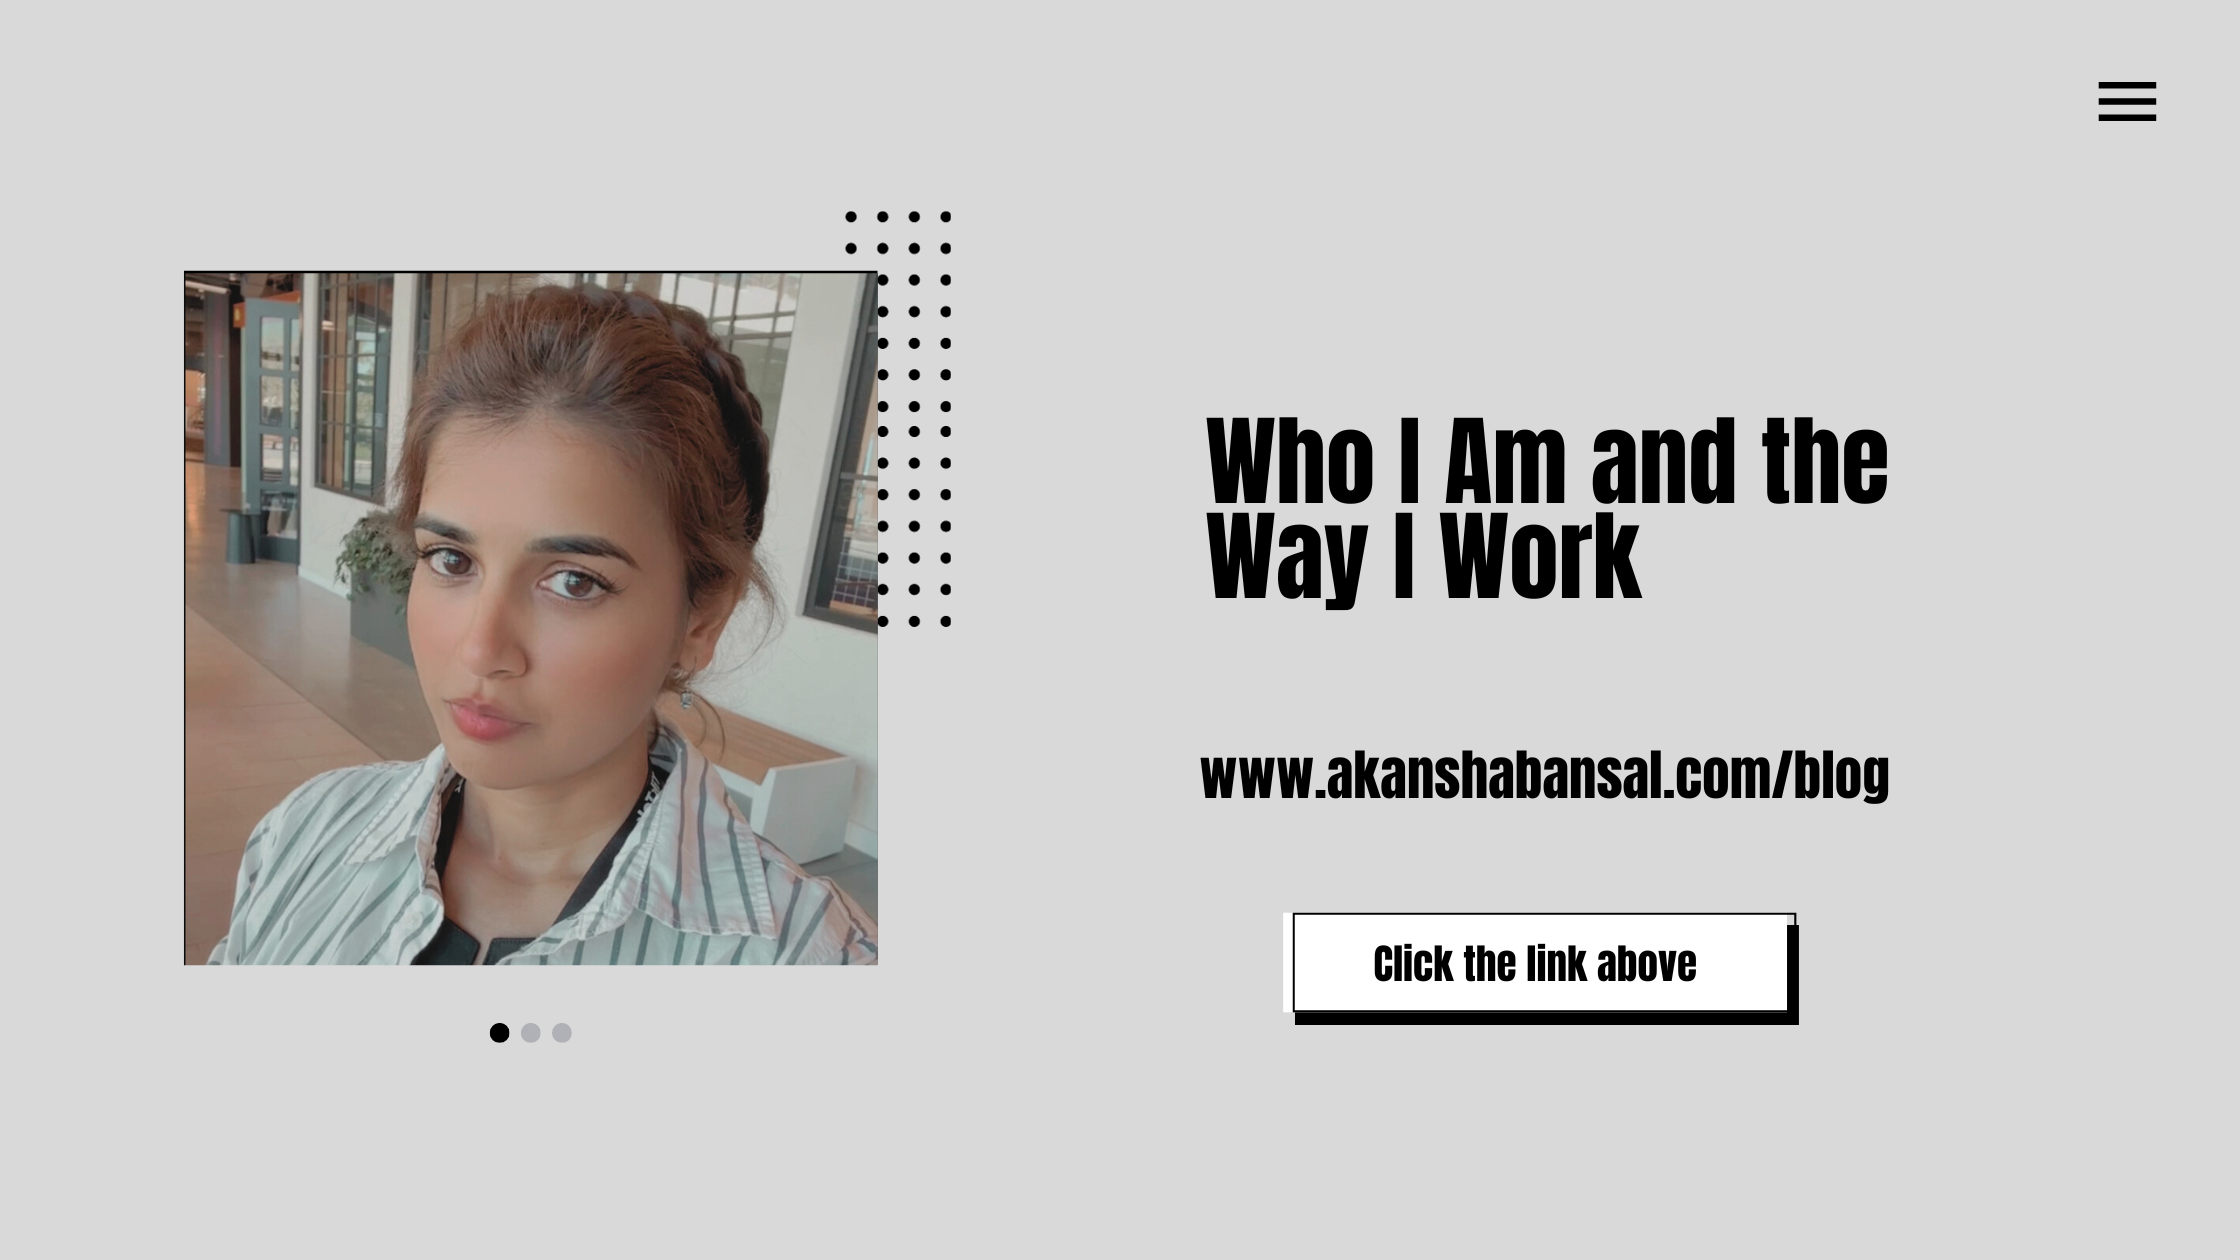 Who I Am and the Way I Work